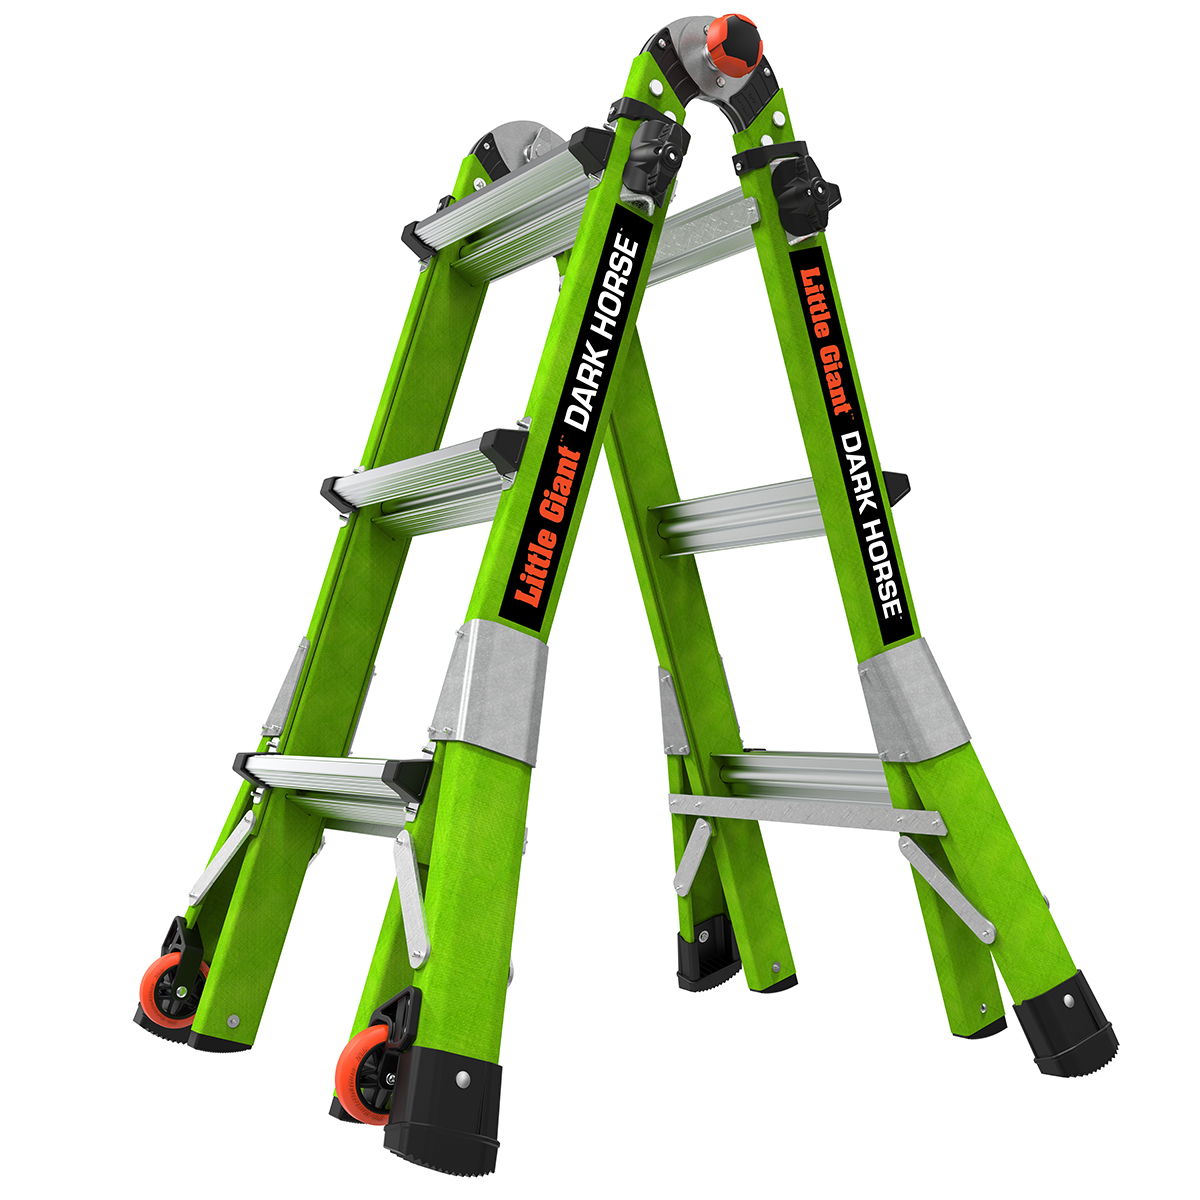 Little Giant Ladders Dark Horse 2.0 Model 13 Type 1A Ladder from Columbia Safety